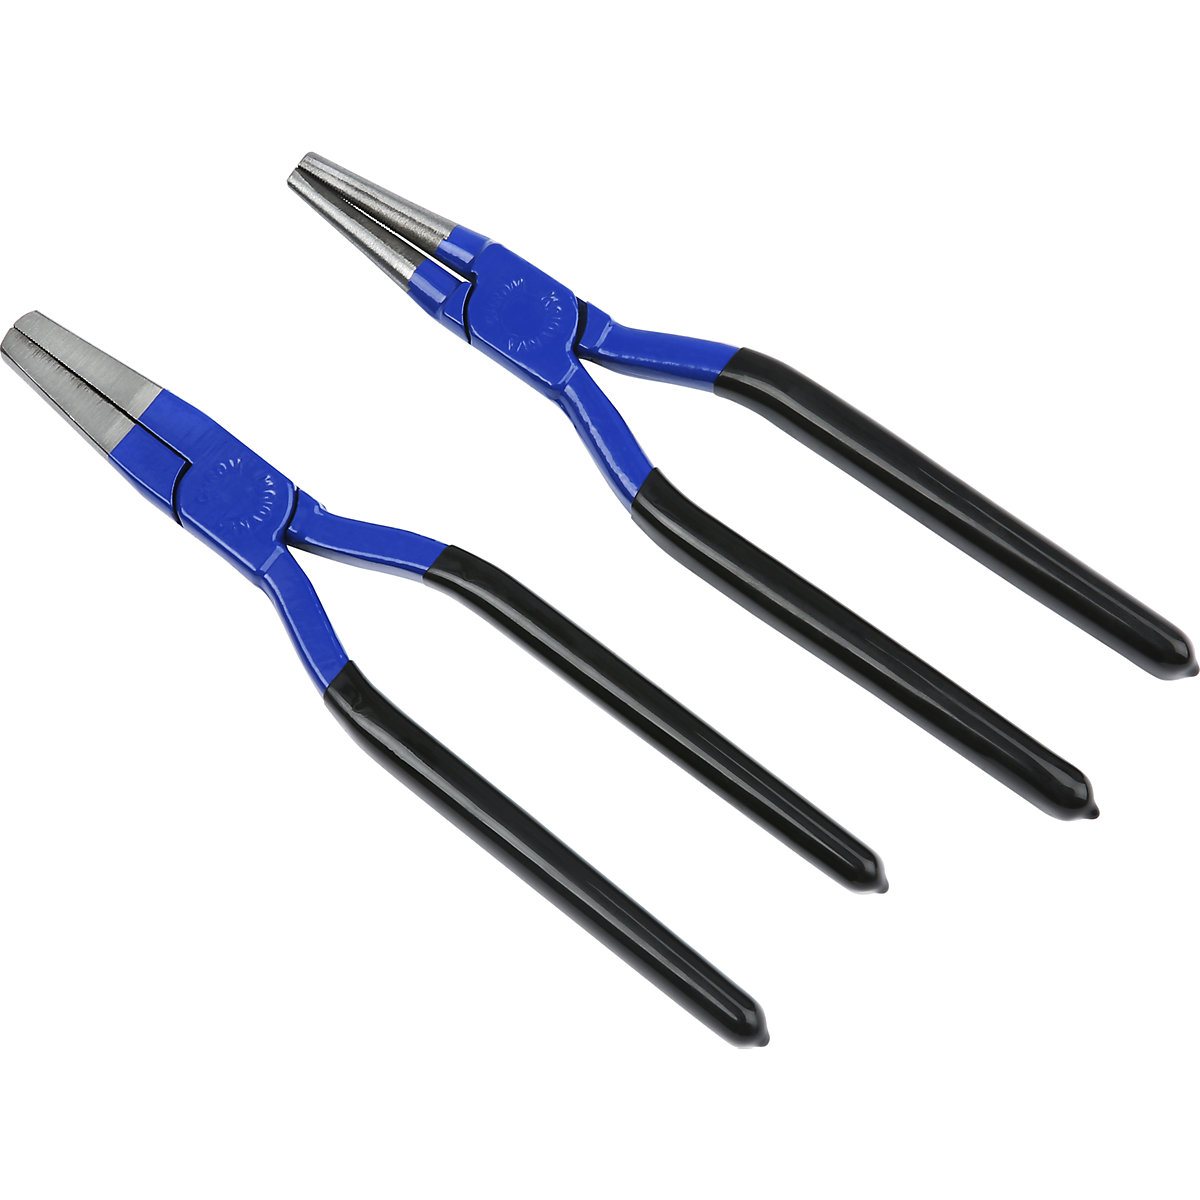 Wide Flat Nose Pliers, Flat Needle Nose Pliers